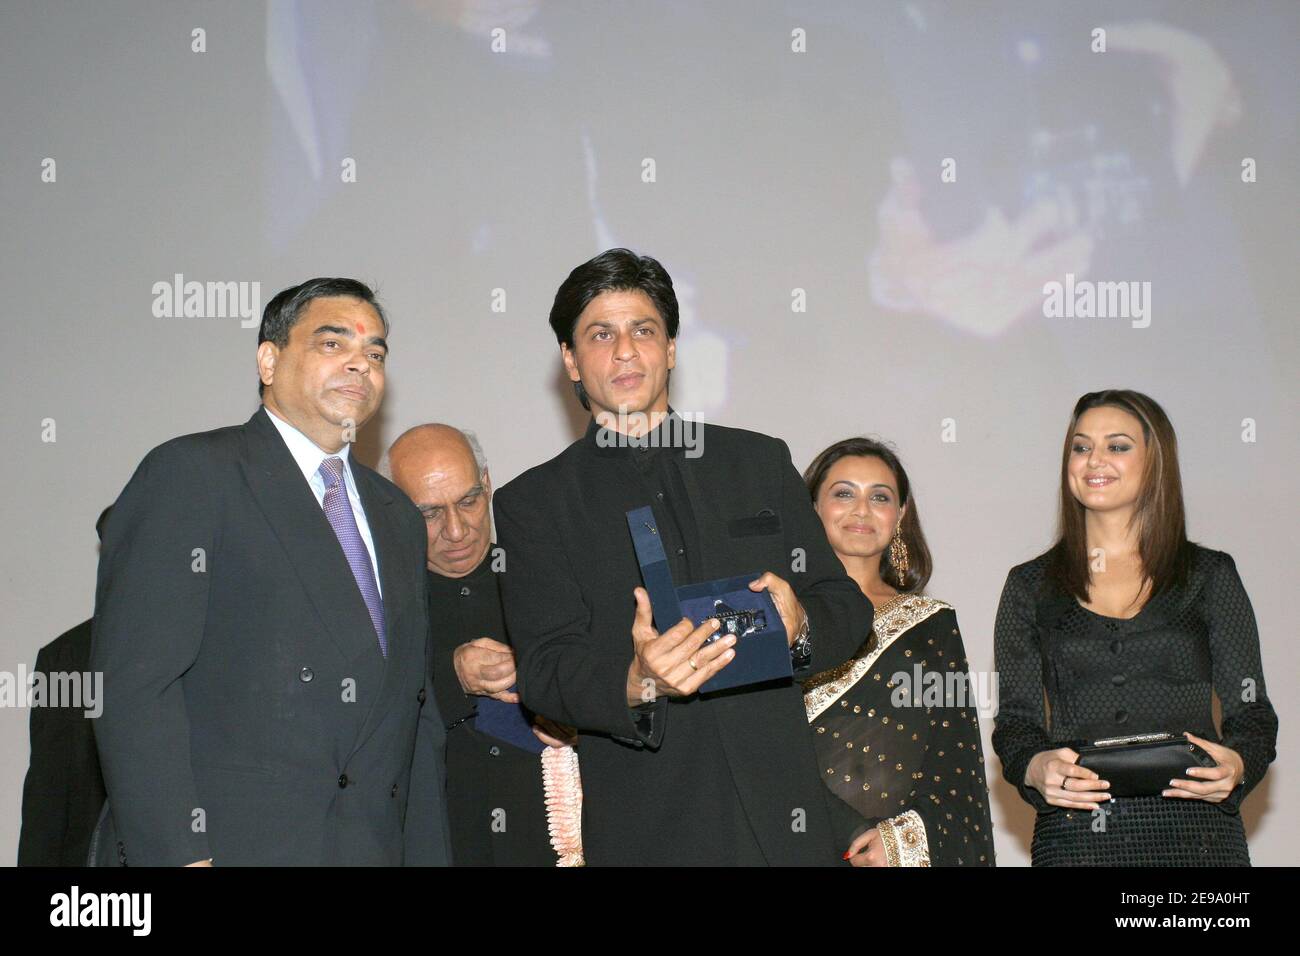 Bollywood star Shah Rukh Khan attends the premiere of his movie Veer-Zaara held at the Rex Movie Theatre in Paris, France on April 26, 2006 as part of the Bollywood Week, in Paris. Photo by Benoit Pinguet/ABACAPRESS.COM Stock Photo